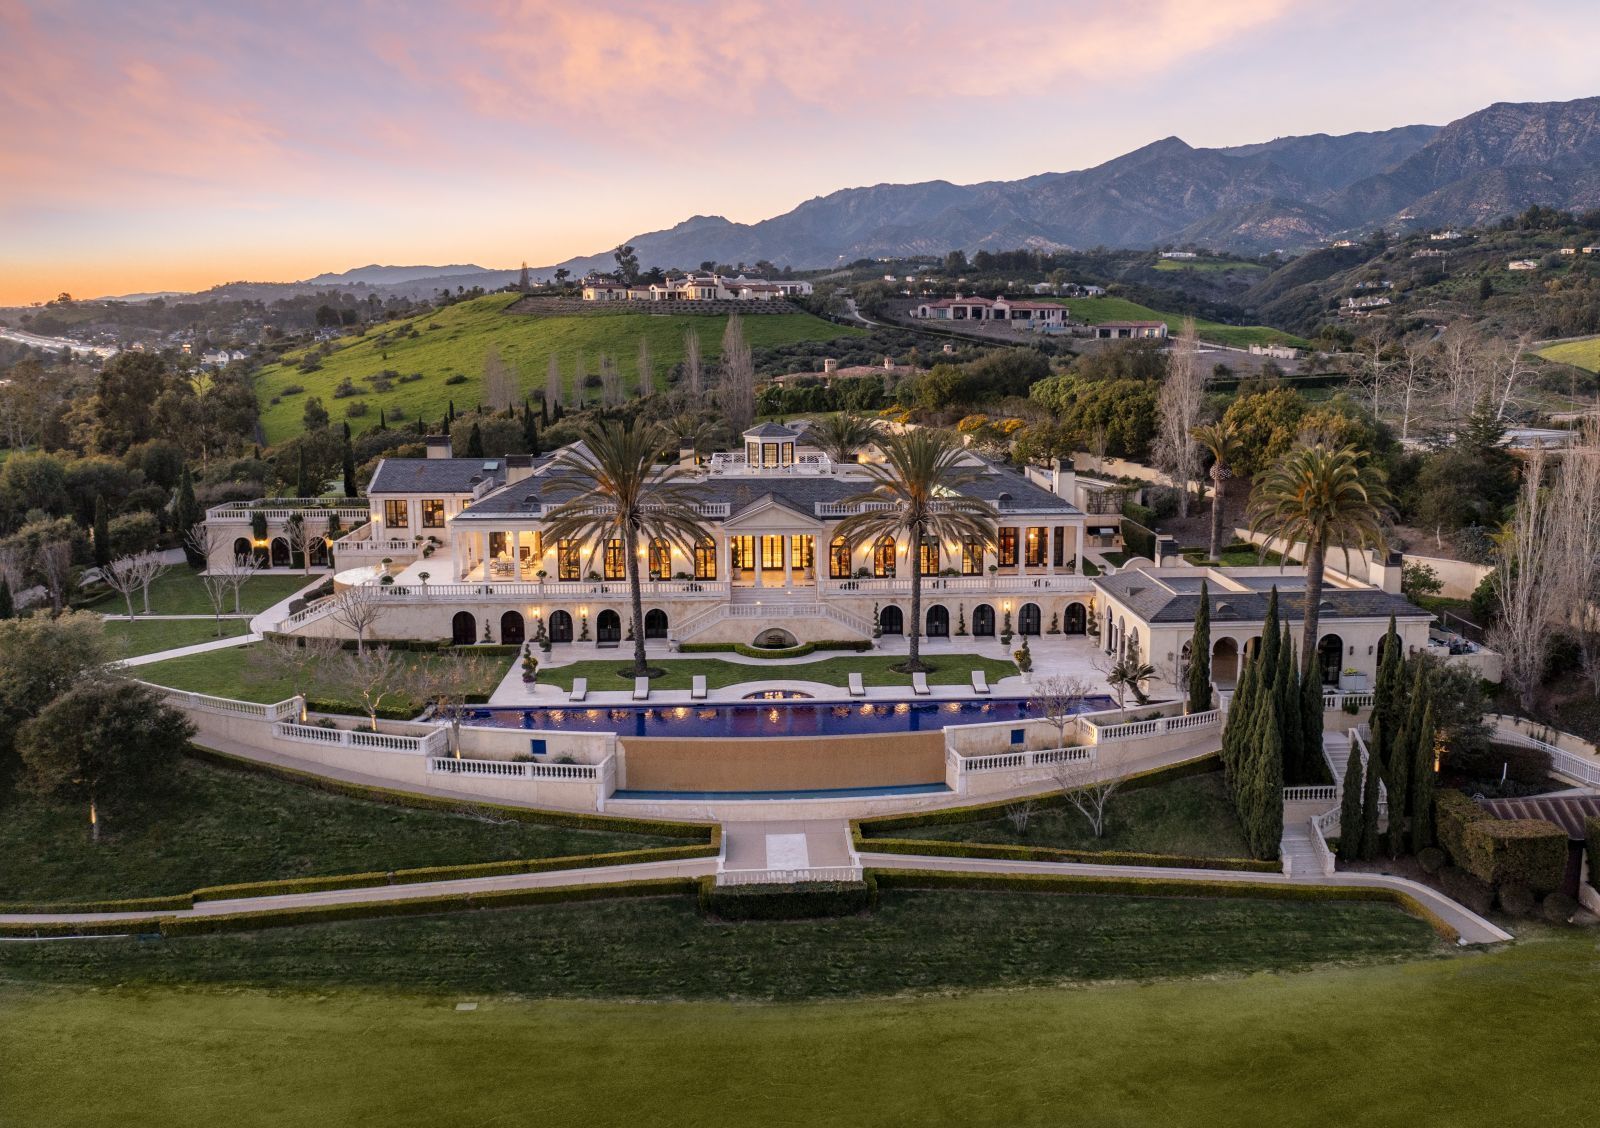 A birds eye view of a massive Montecito Estate framed by incredible landscaping, a 124 ft. pool, and private polo grounds